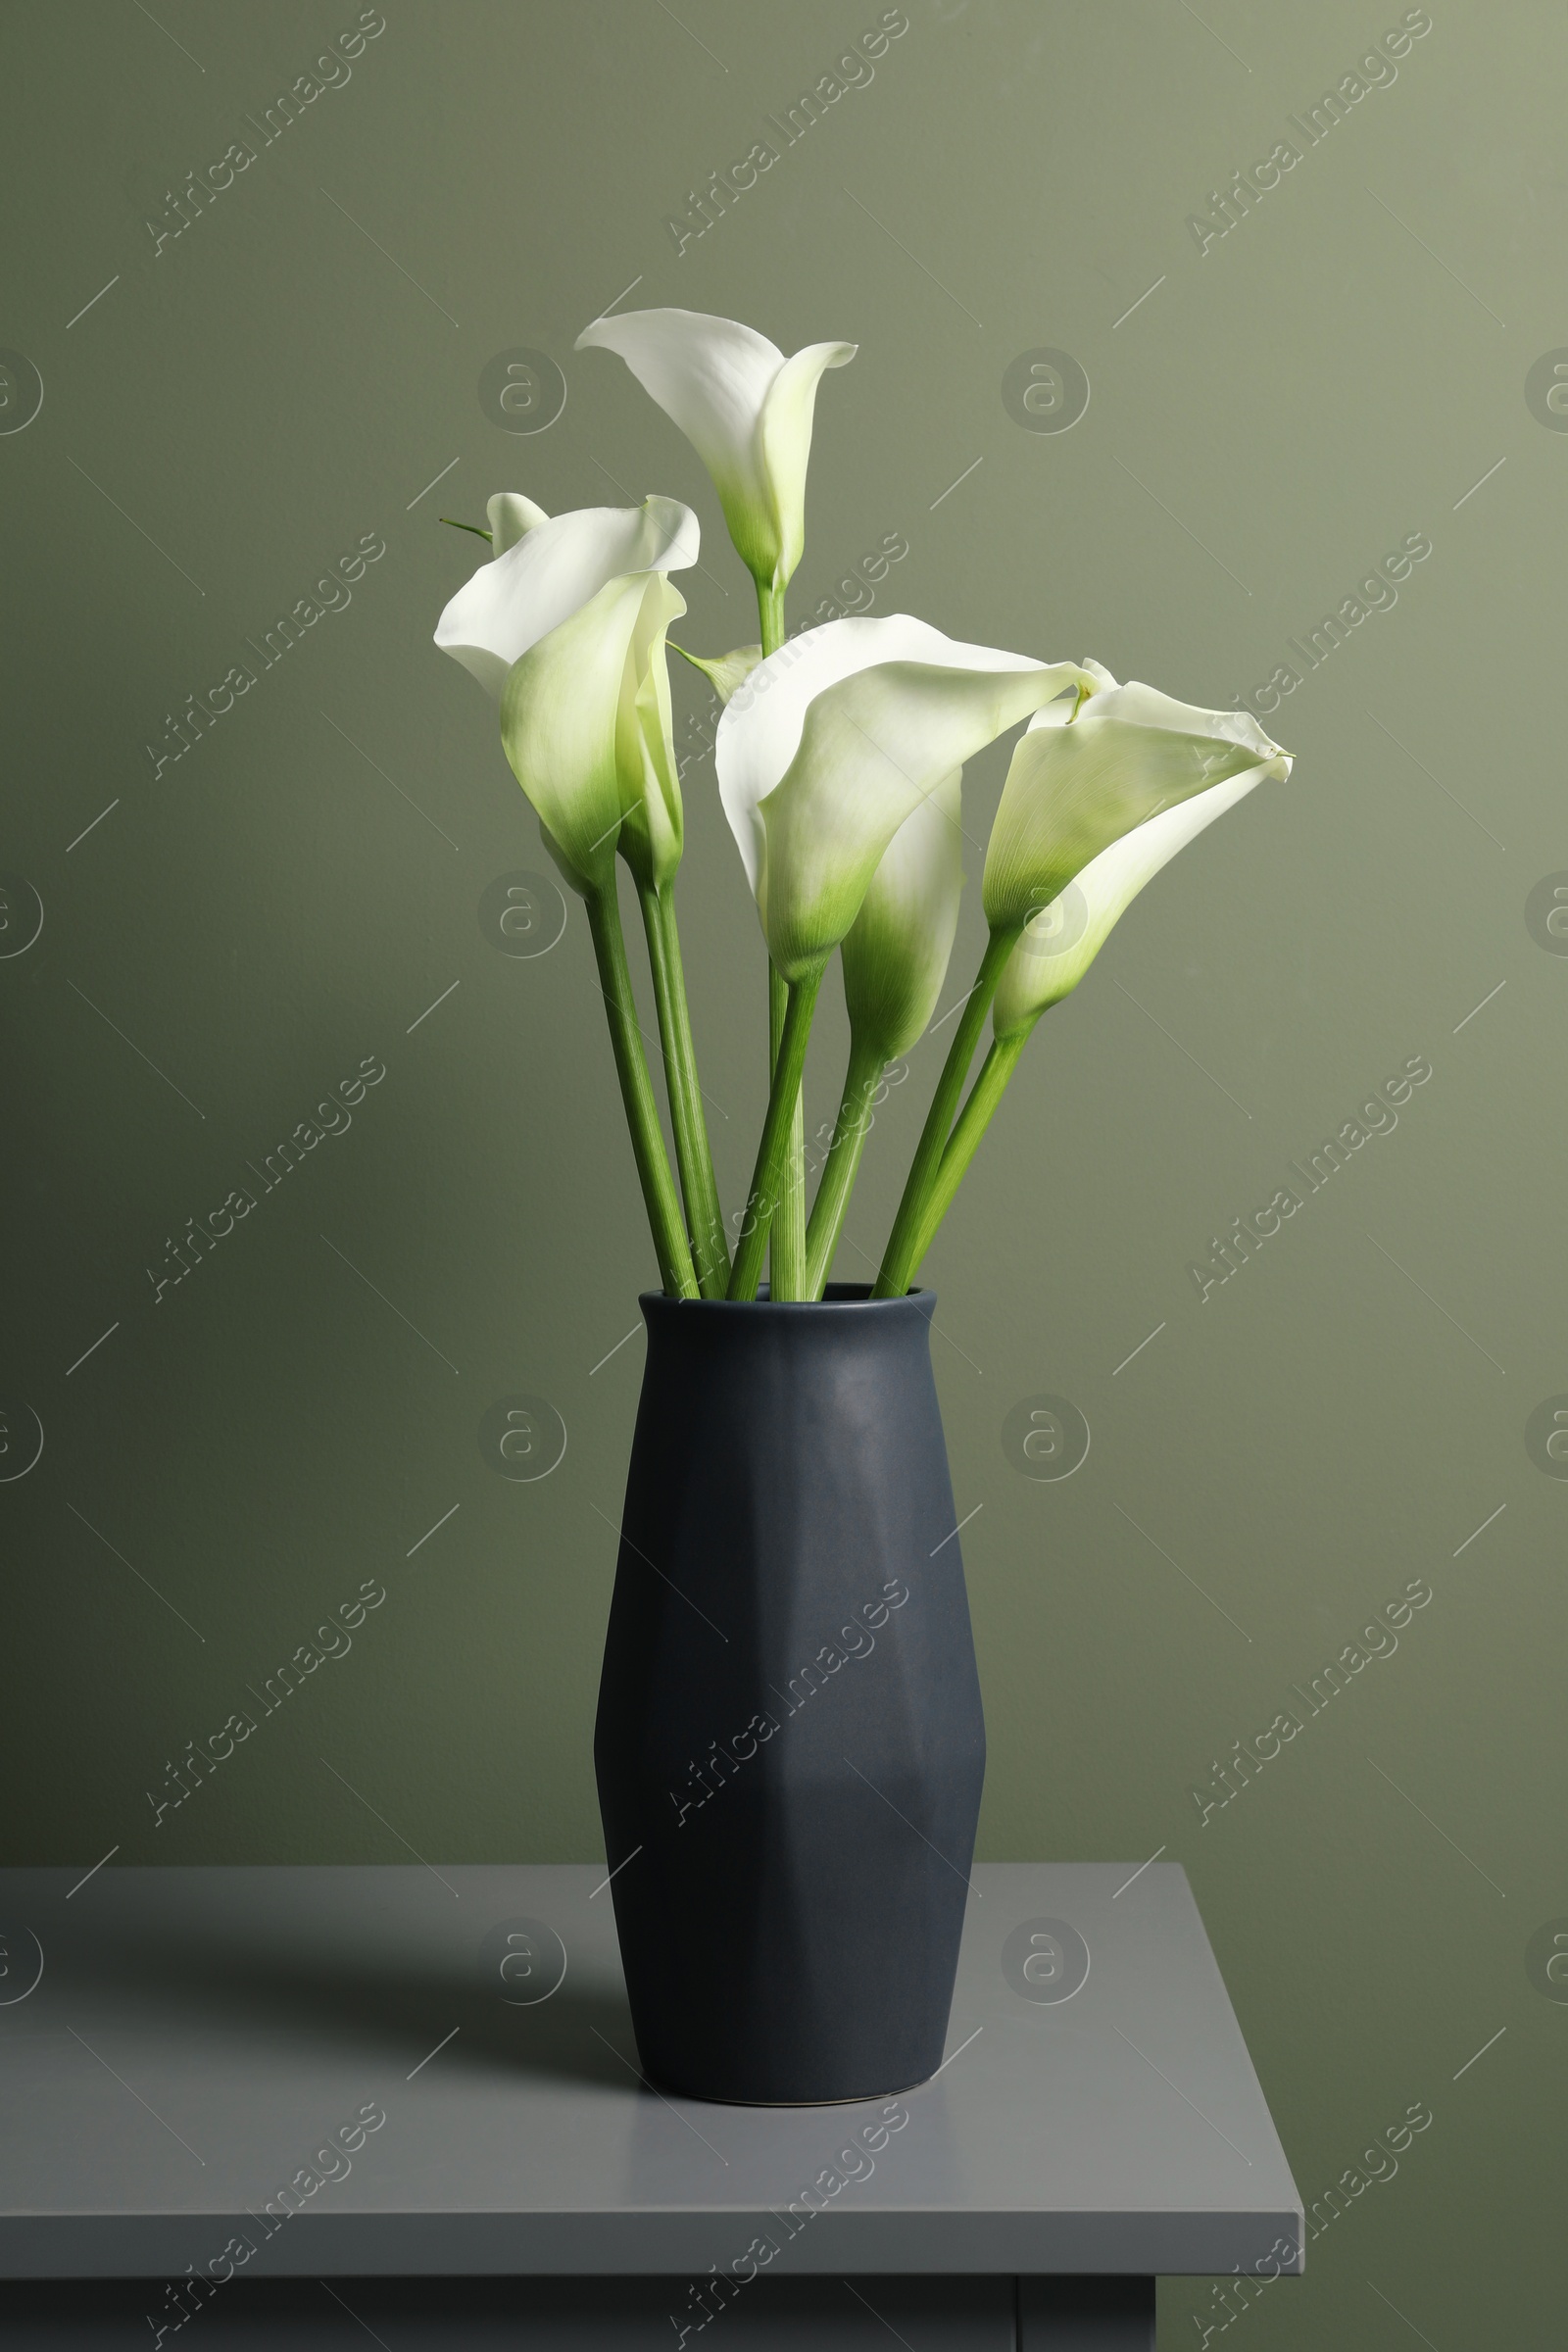 Photo of Beautiful calla lily flowers in vase on grey table near olive wall